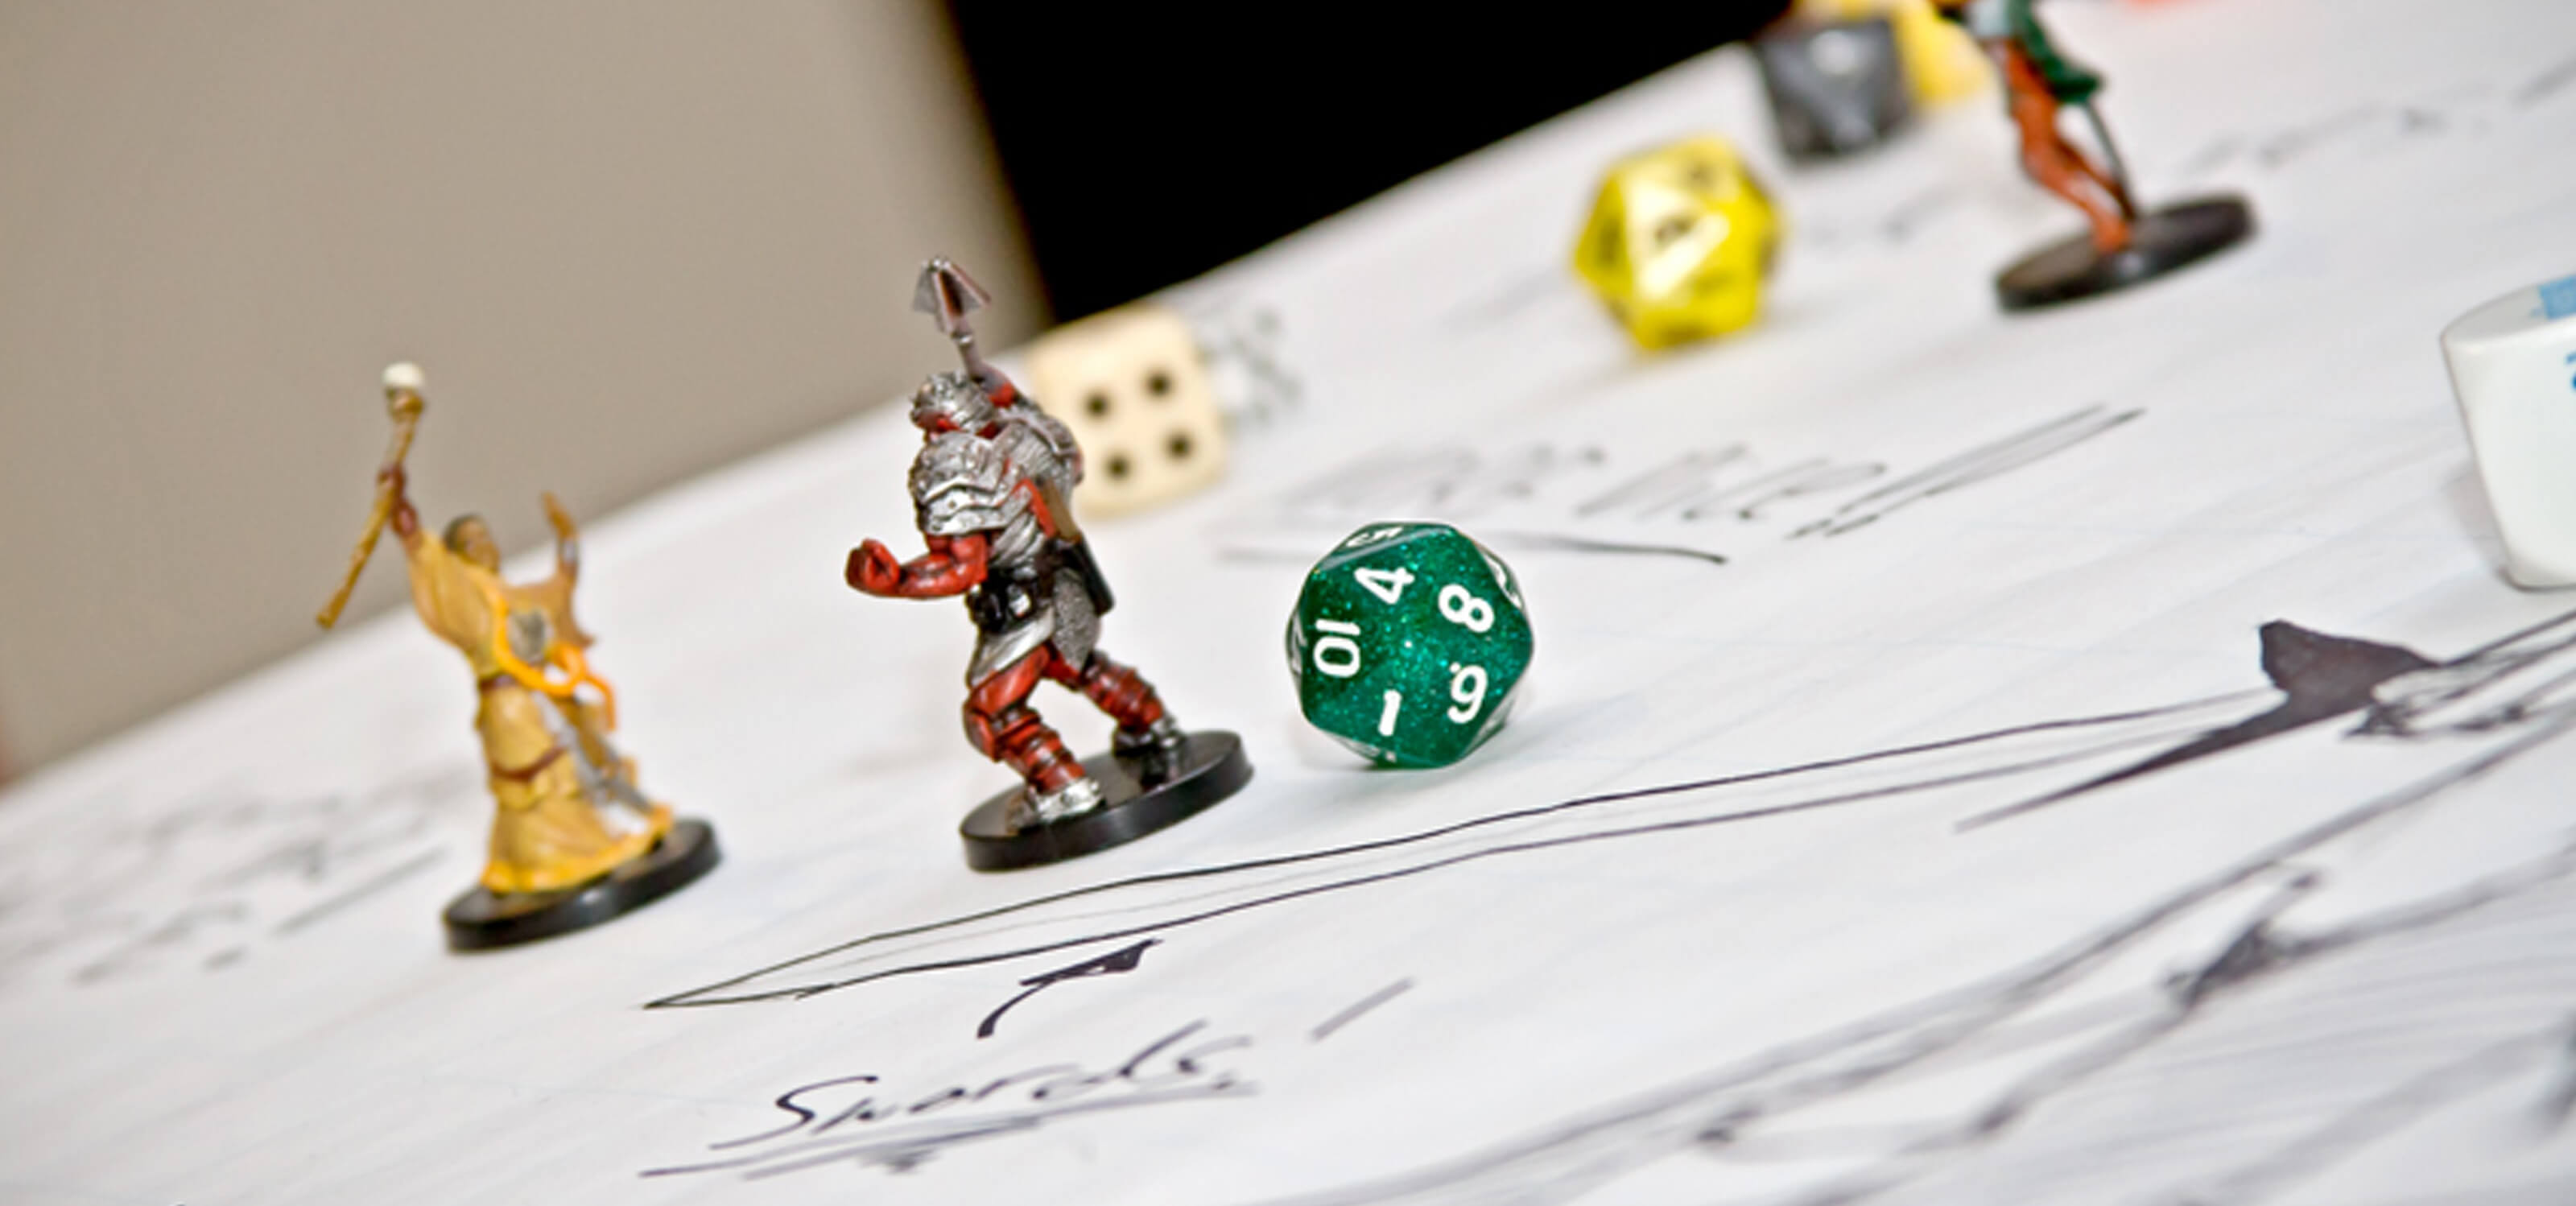 Close-up of board game figurines and 10-sided die